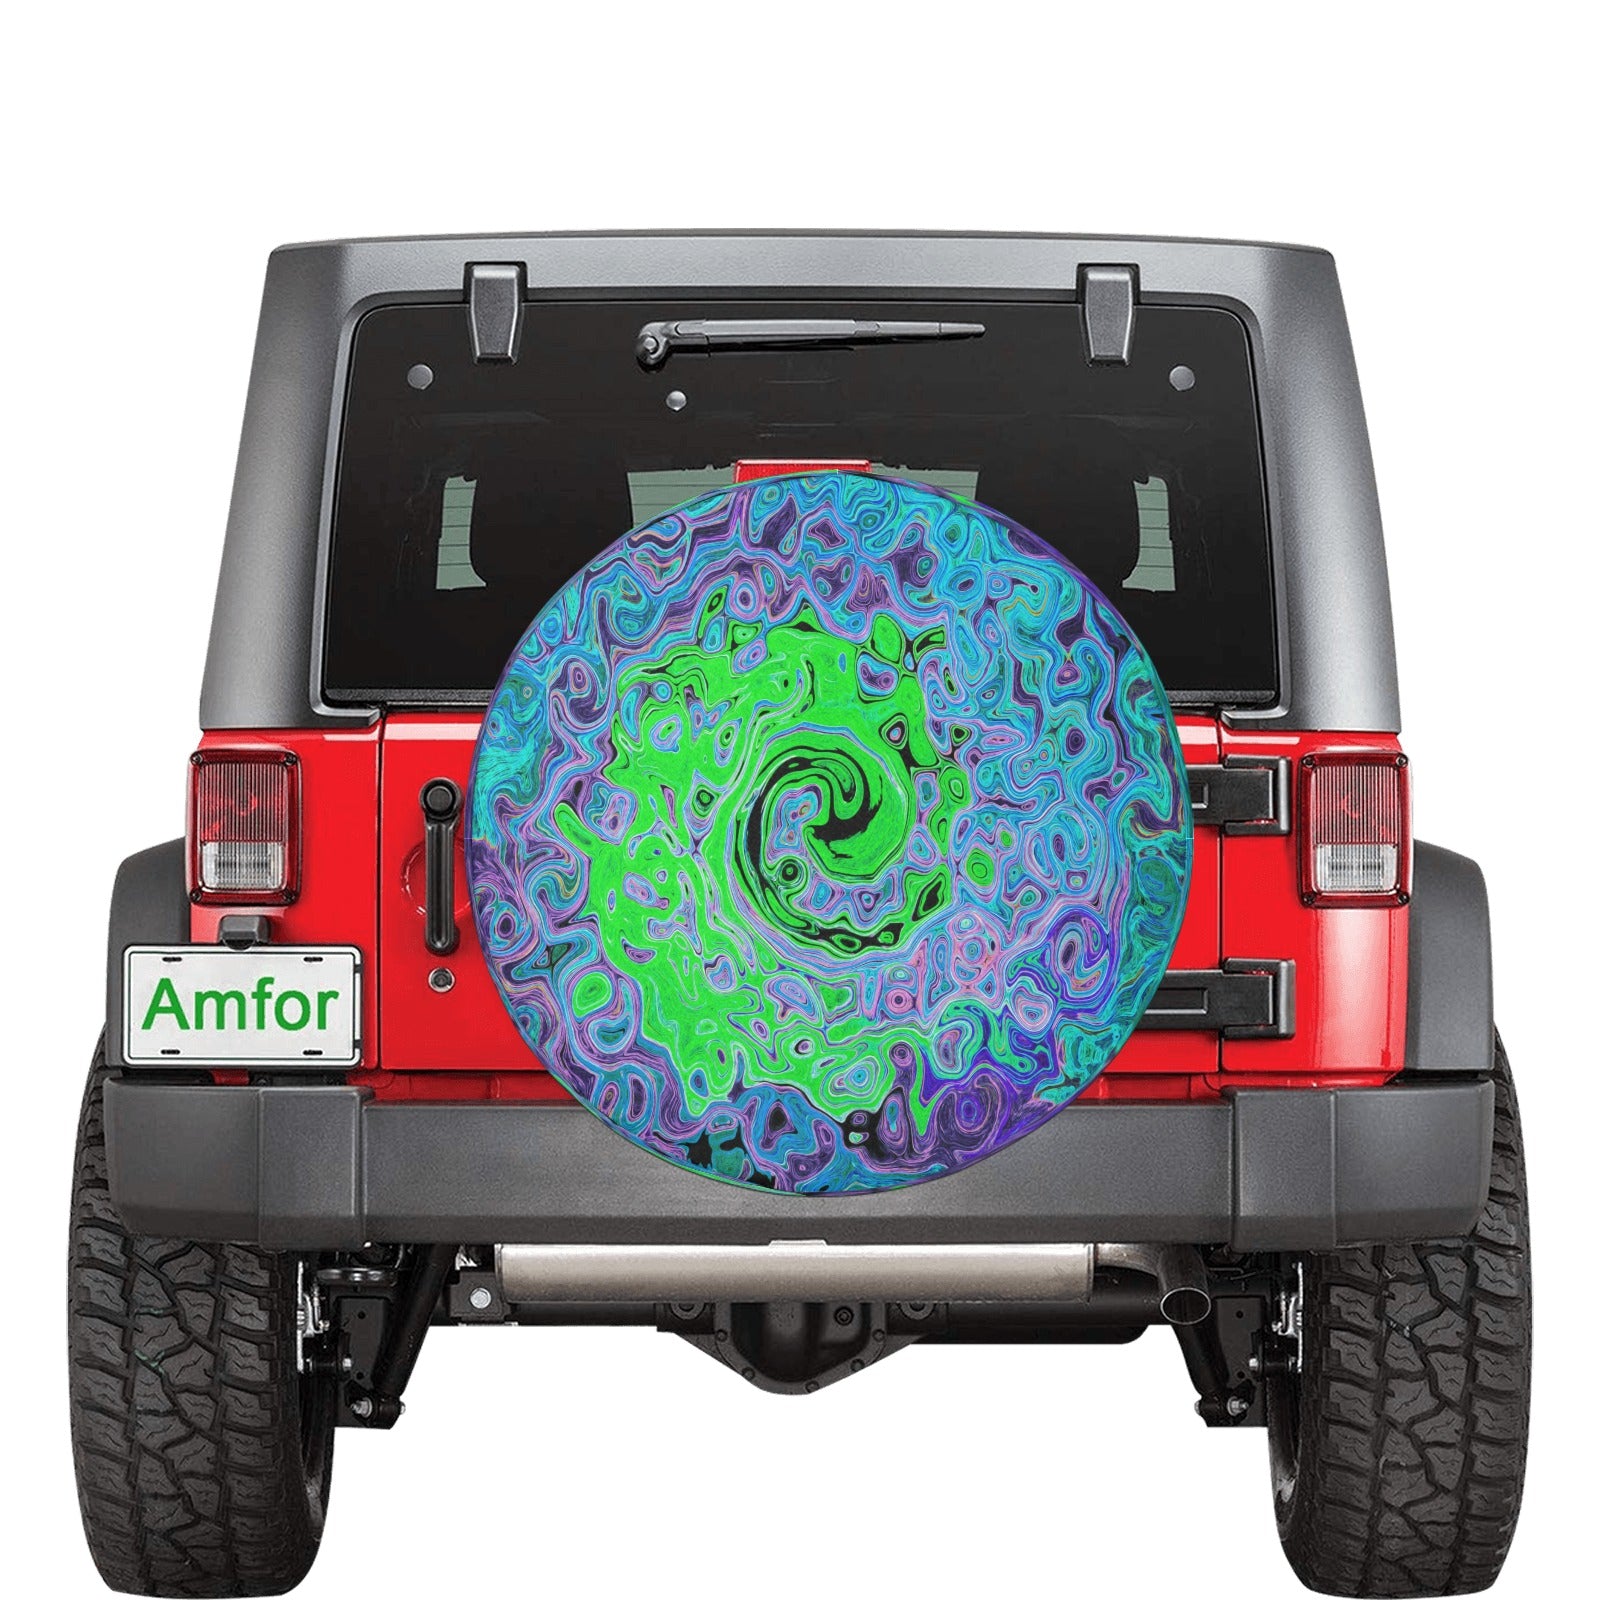 Spare Tire Covers, Lime Green Groovy Abstract Retro Liquid Swirl - Large